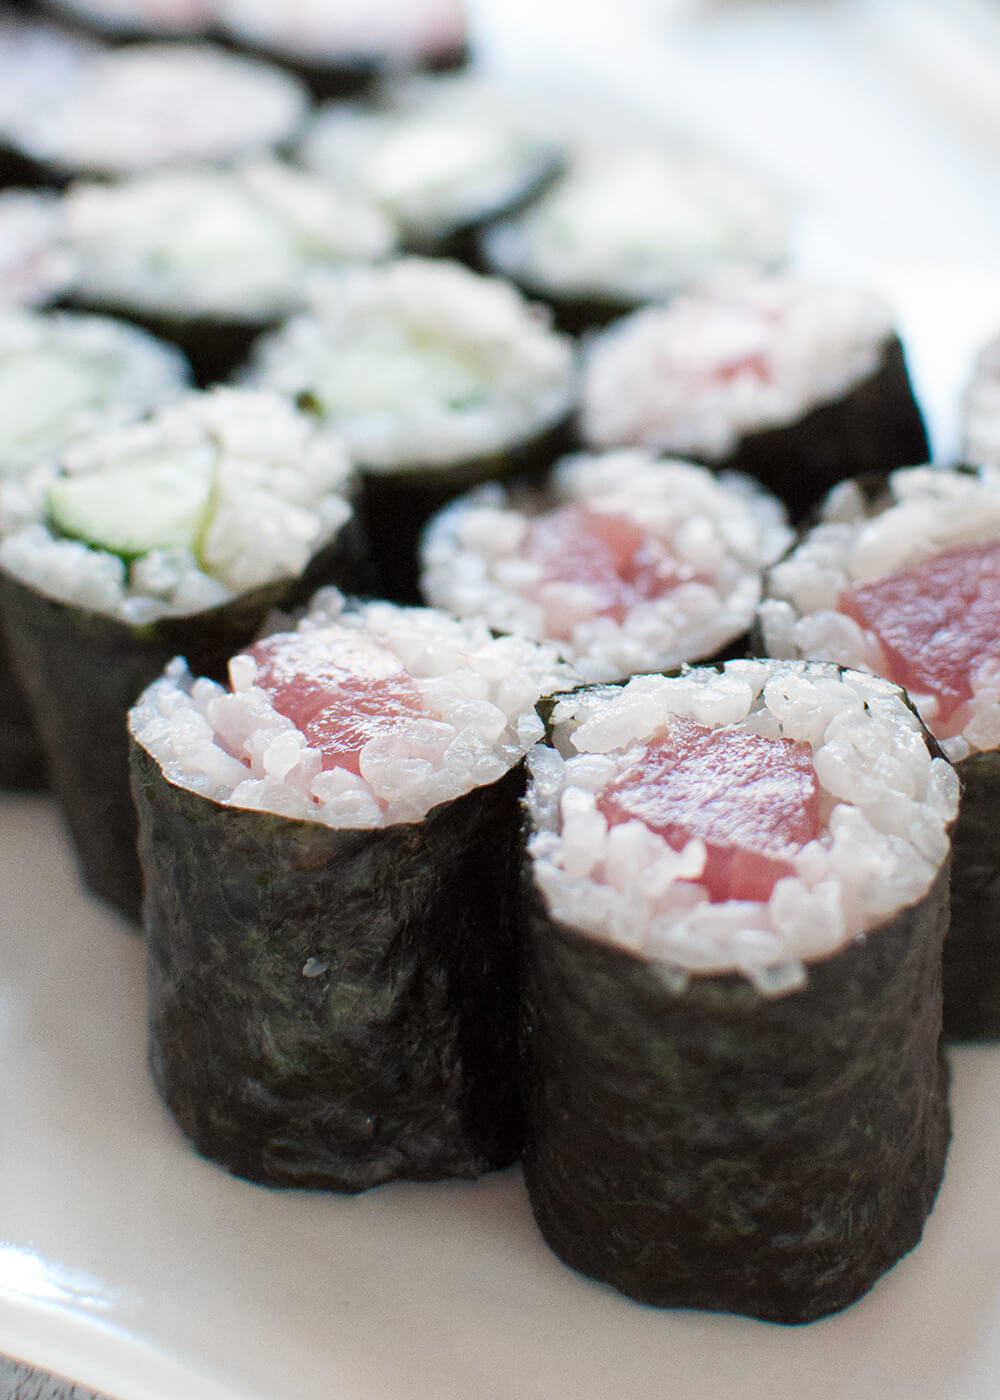 Sushi rolls are becoming a popular healthy take-away food in Australia. Most of them are made as large thick rolls, but the sushi rolls made at traditional sushi restaurants are thin, tiny rolls just perfect for finger food.